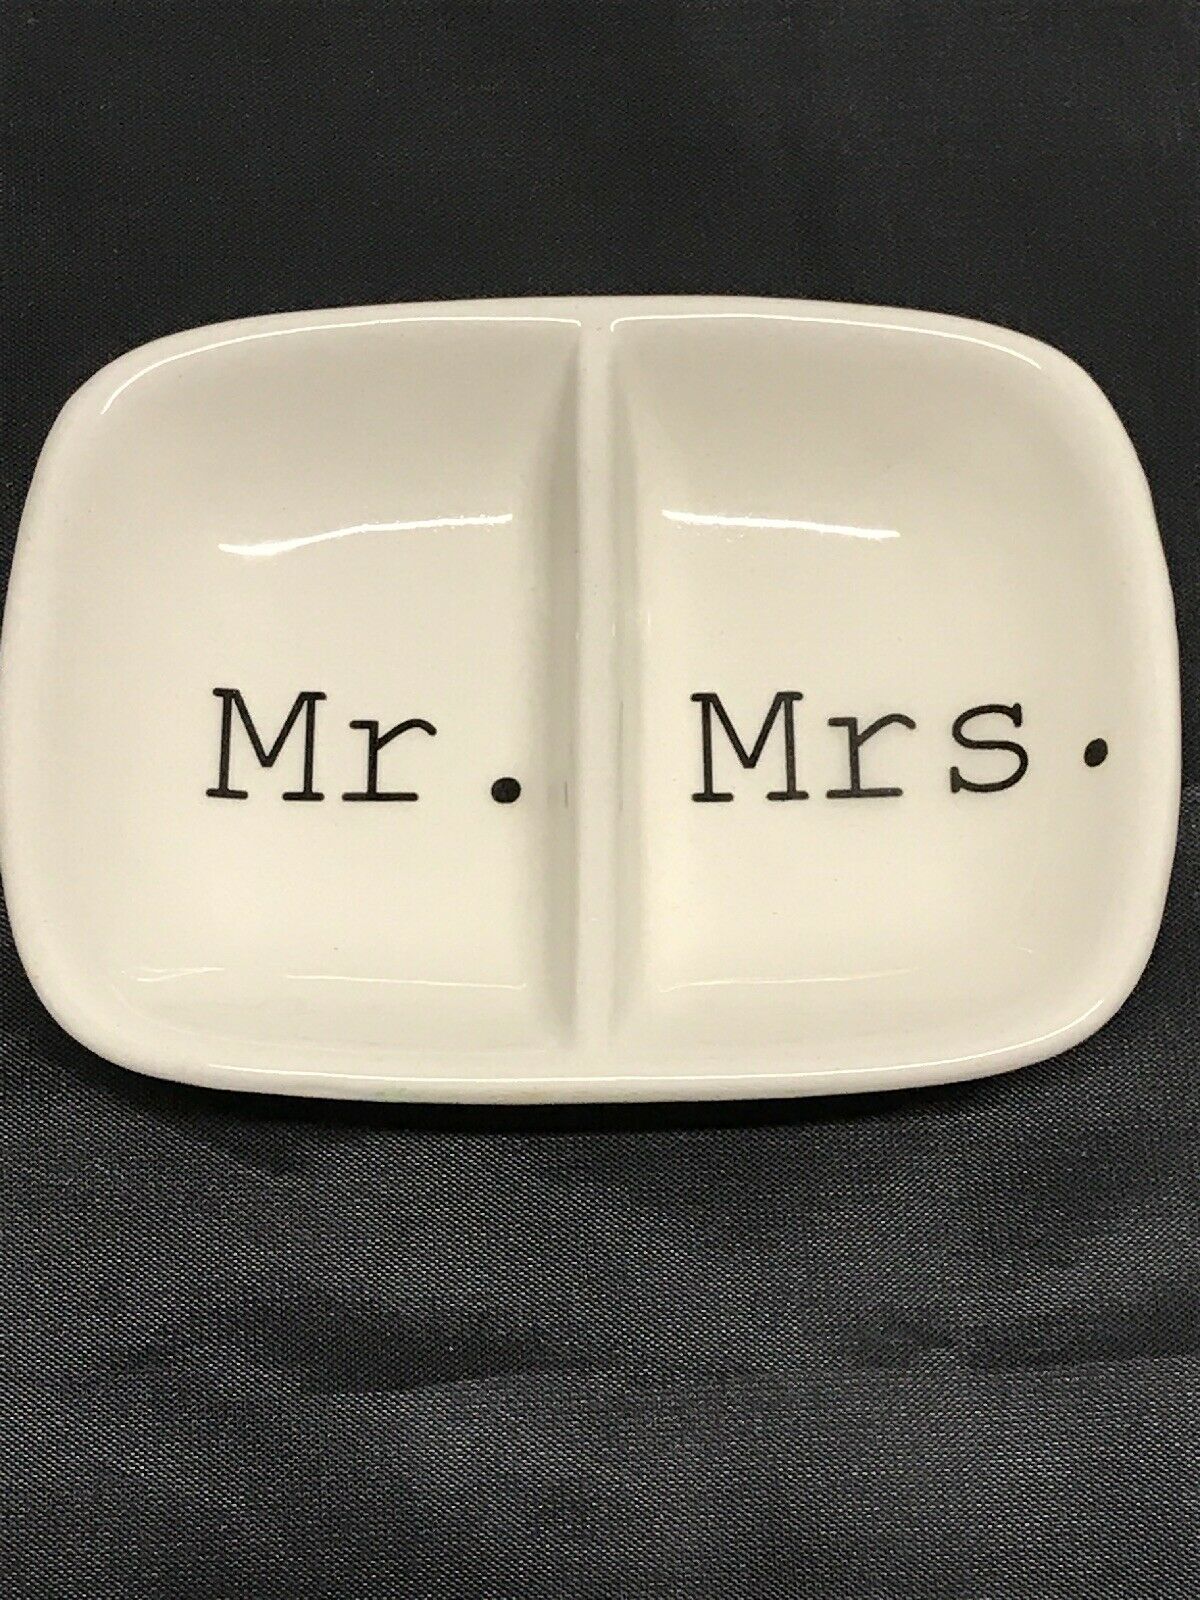 Mr. & Mrs Creative Co-op Ceramic Two Section Dish White Newlyweds Anniversary